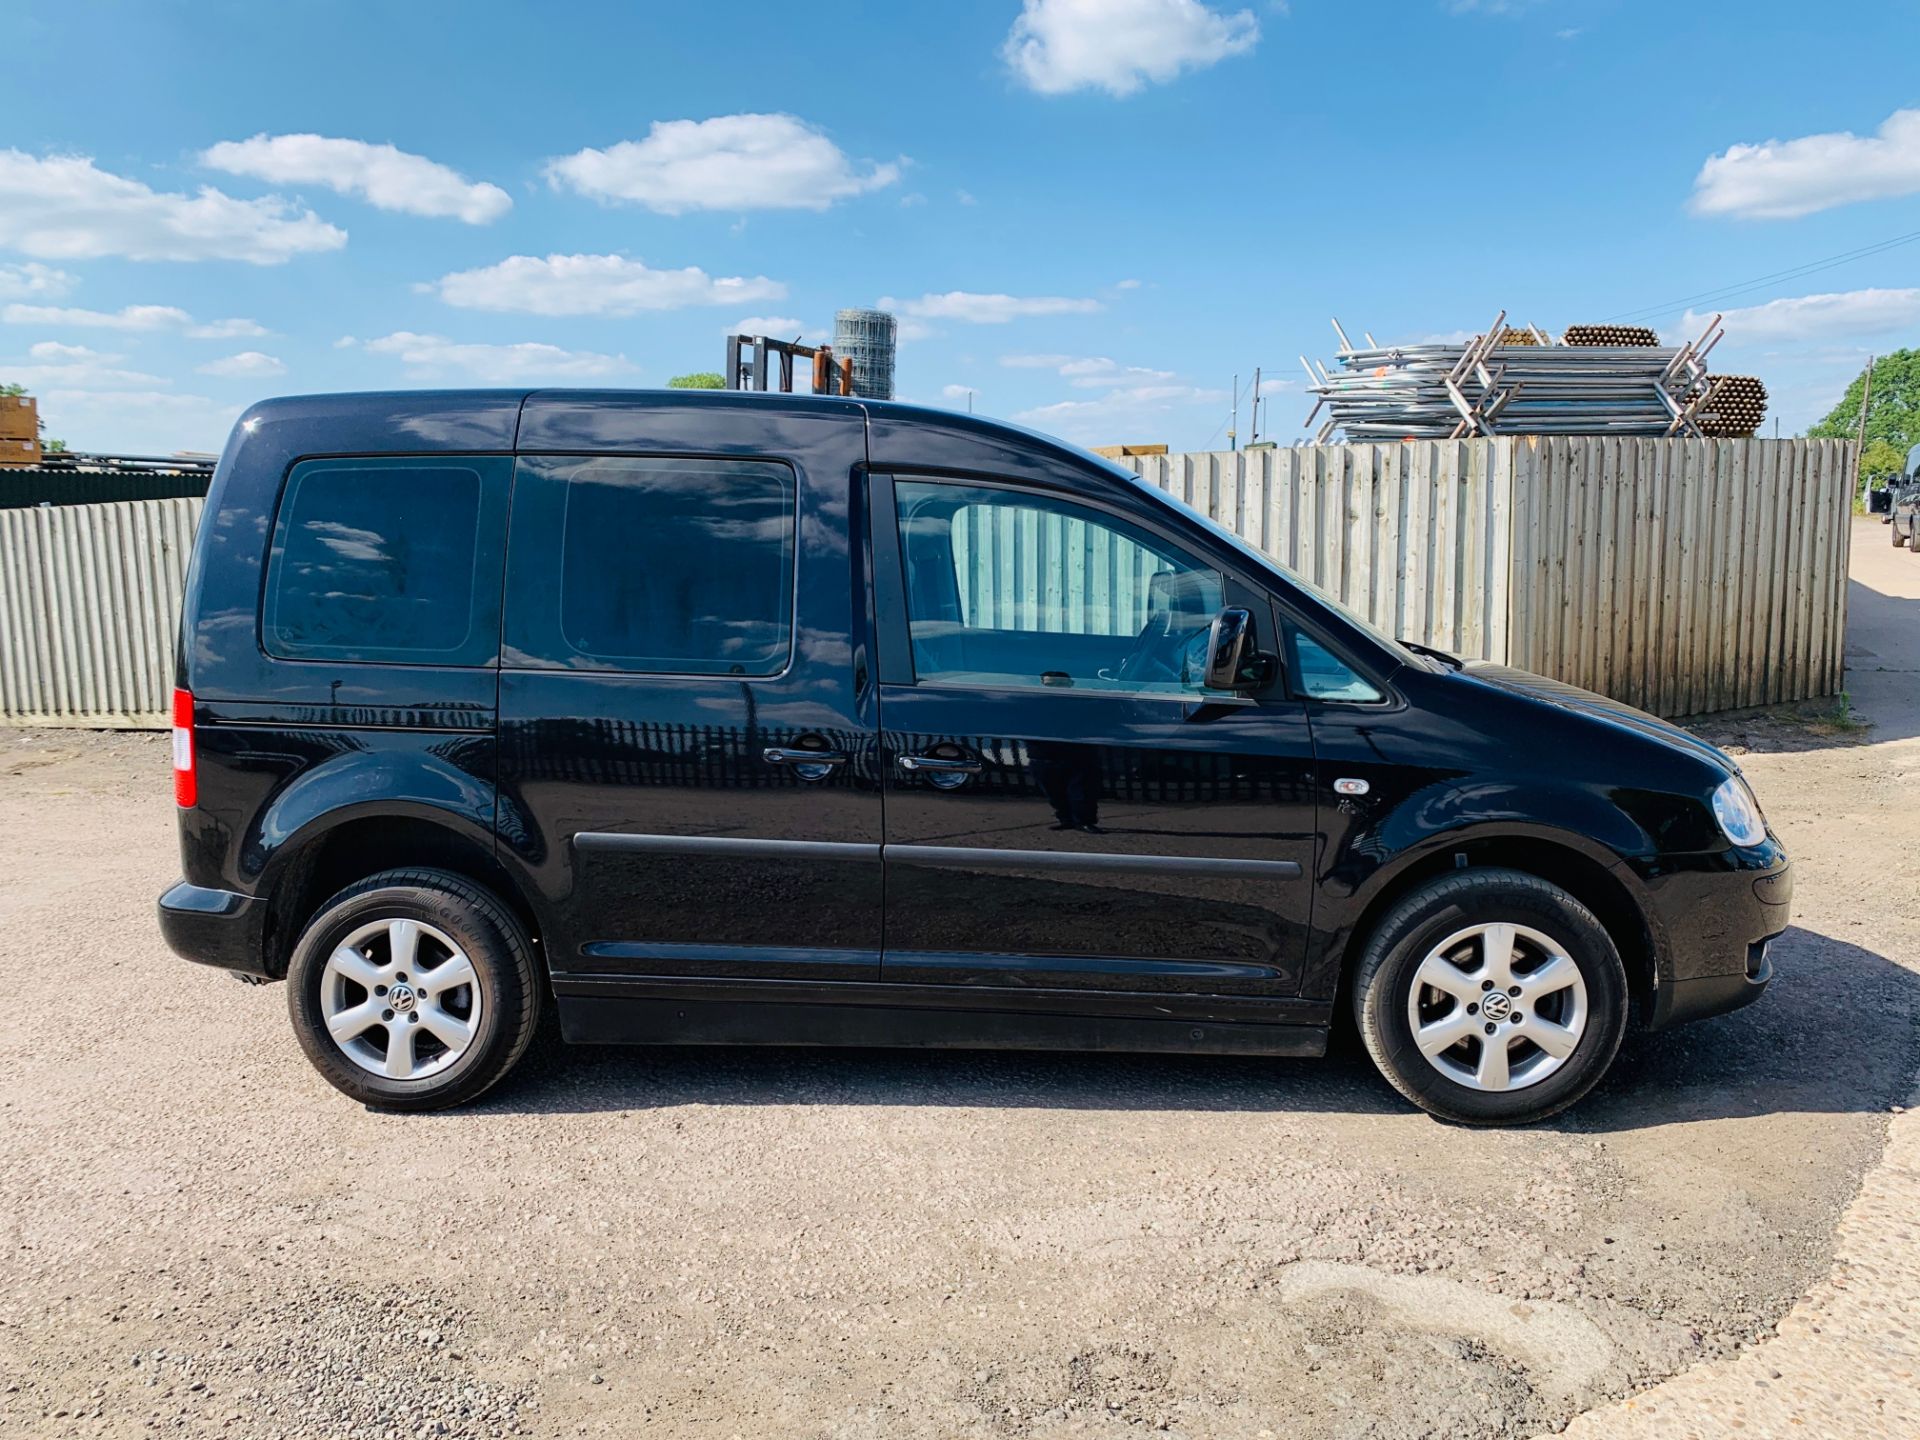 VOLKSWAGEN CADDY 1.9TDI "LIFE" DSG AUTO - WHEELCHAIR / DISABLED DRIVER VEHICLE -1 KEEPER - 42K MILES - Image 5 of 20